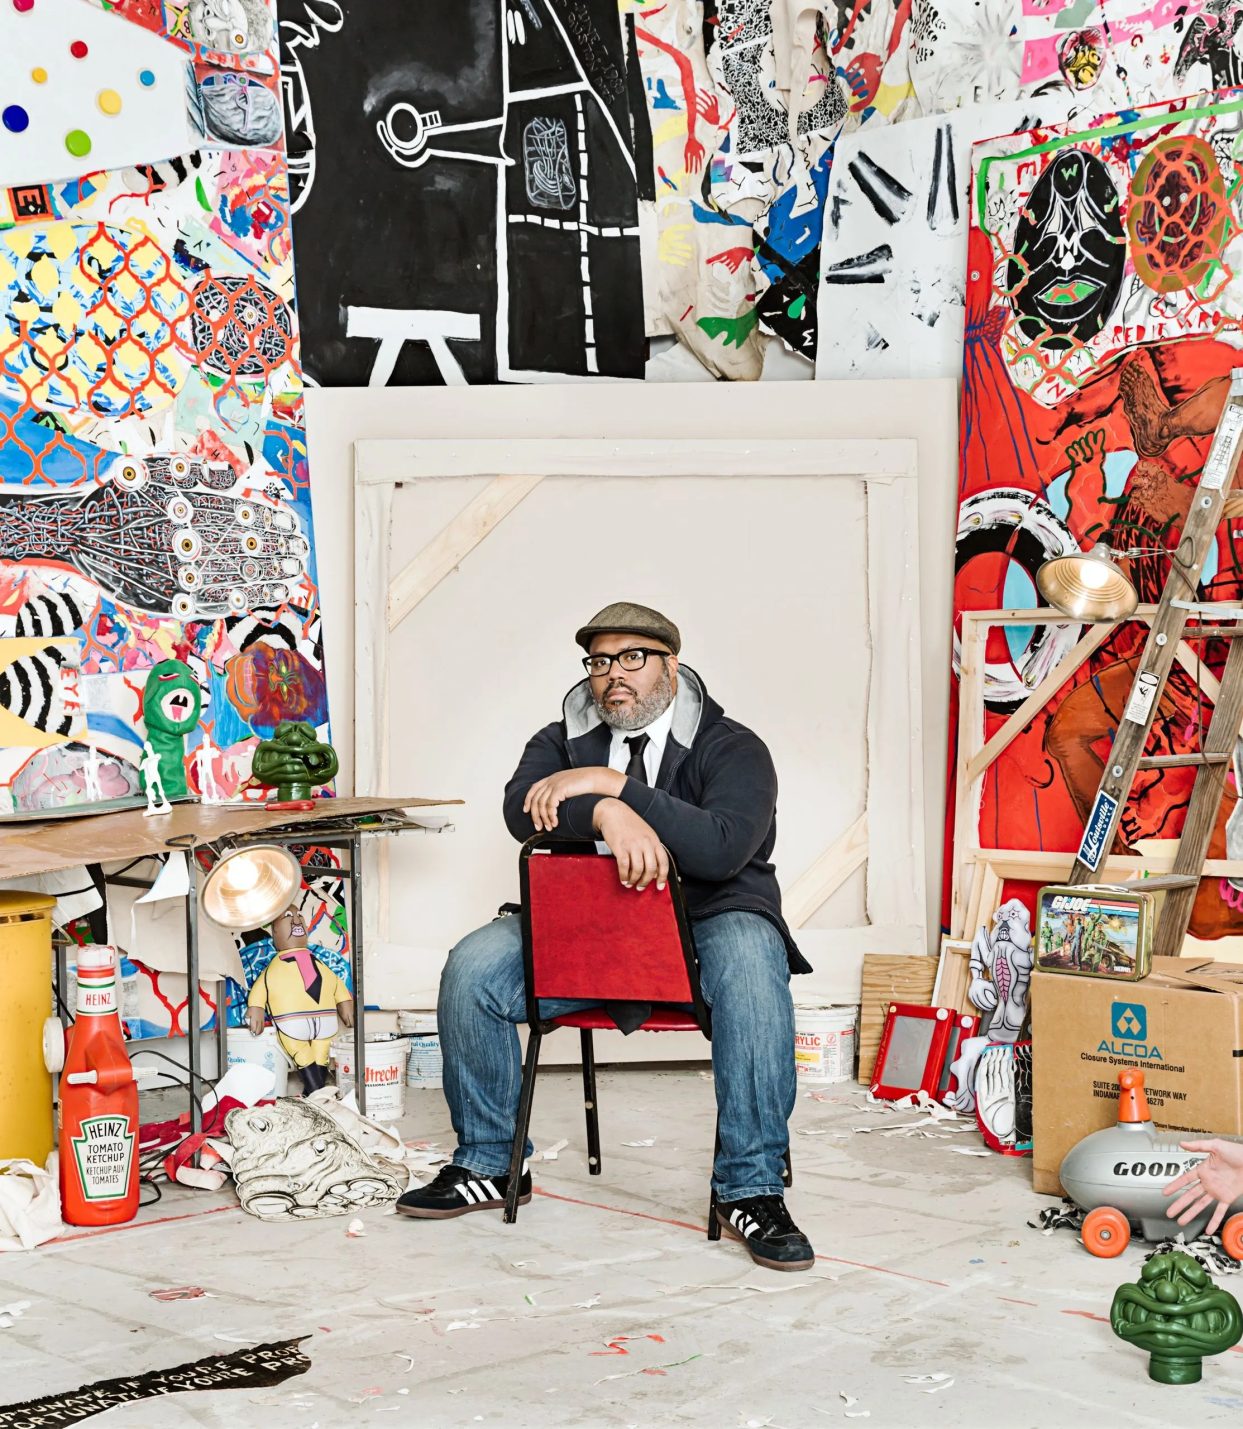 Trenton Doyle Hancock sitting in a chair surrounded by colorfully painted walls